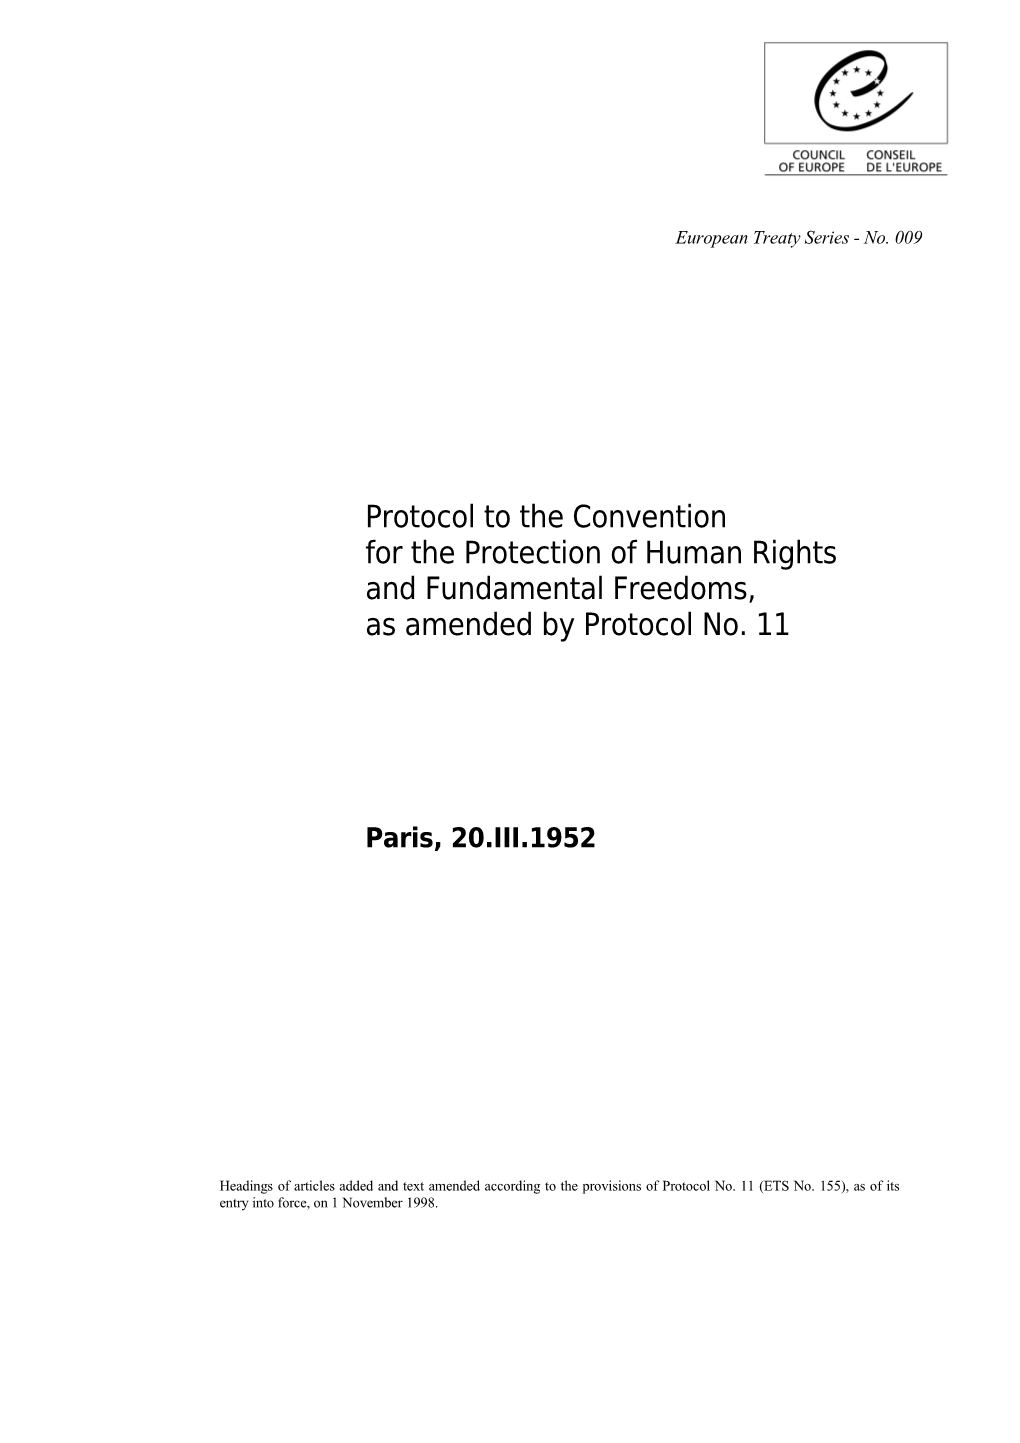 Protocol to the Convention for the Protection of Human Rights and Fundamental Freedoms s1